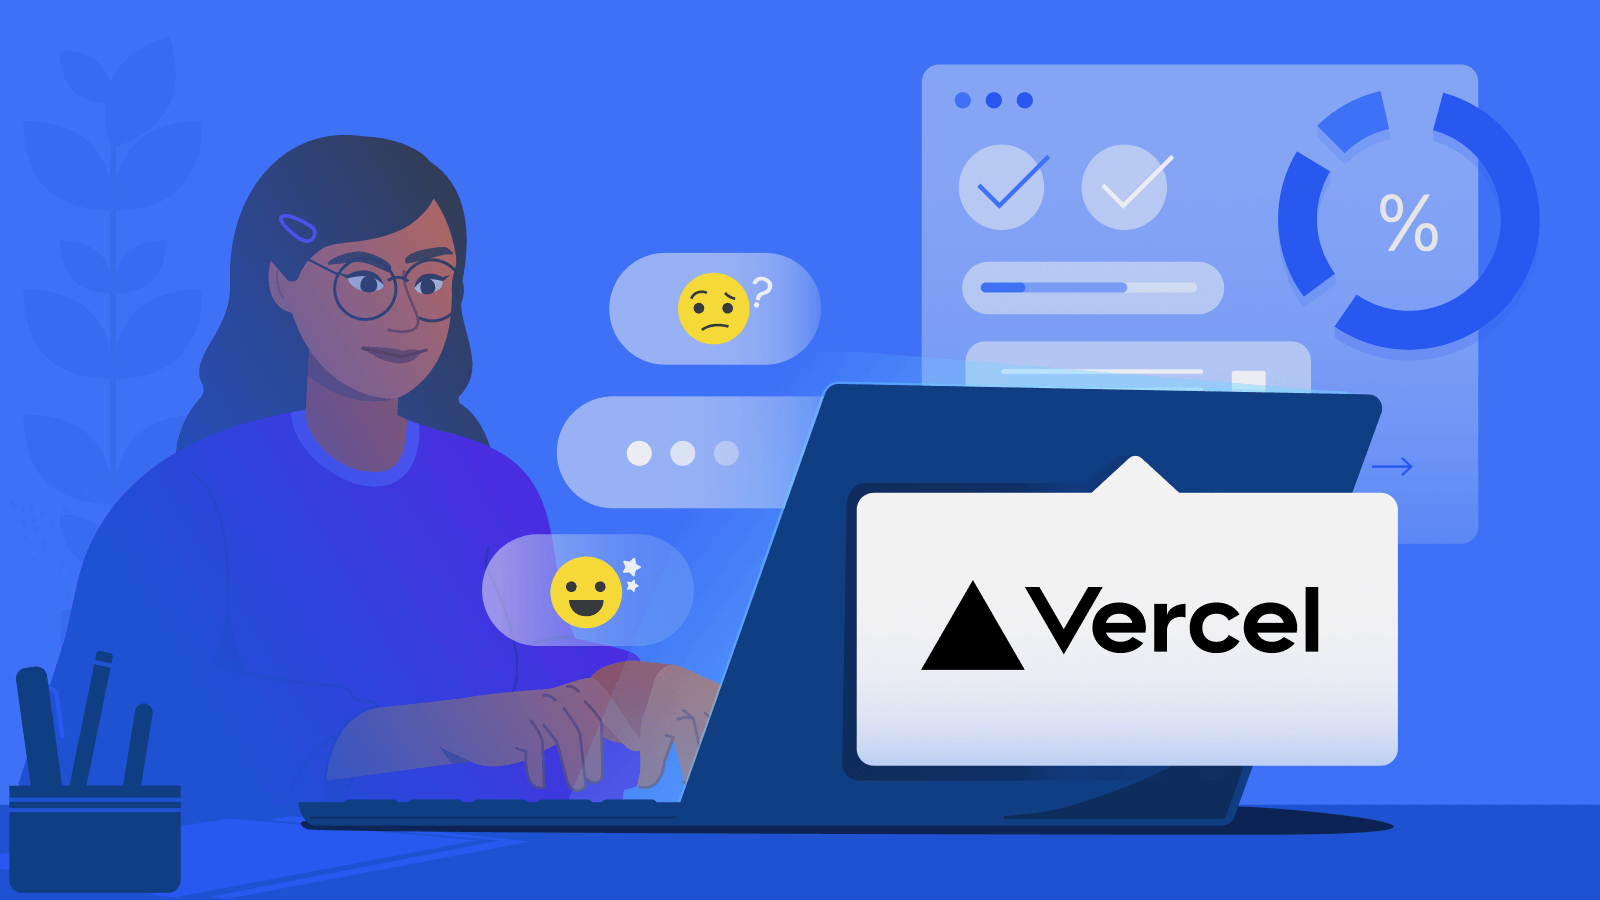 Unboxing Vercel—a sometimes too-simple onboarding